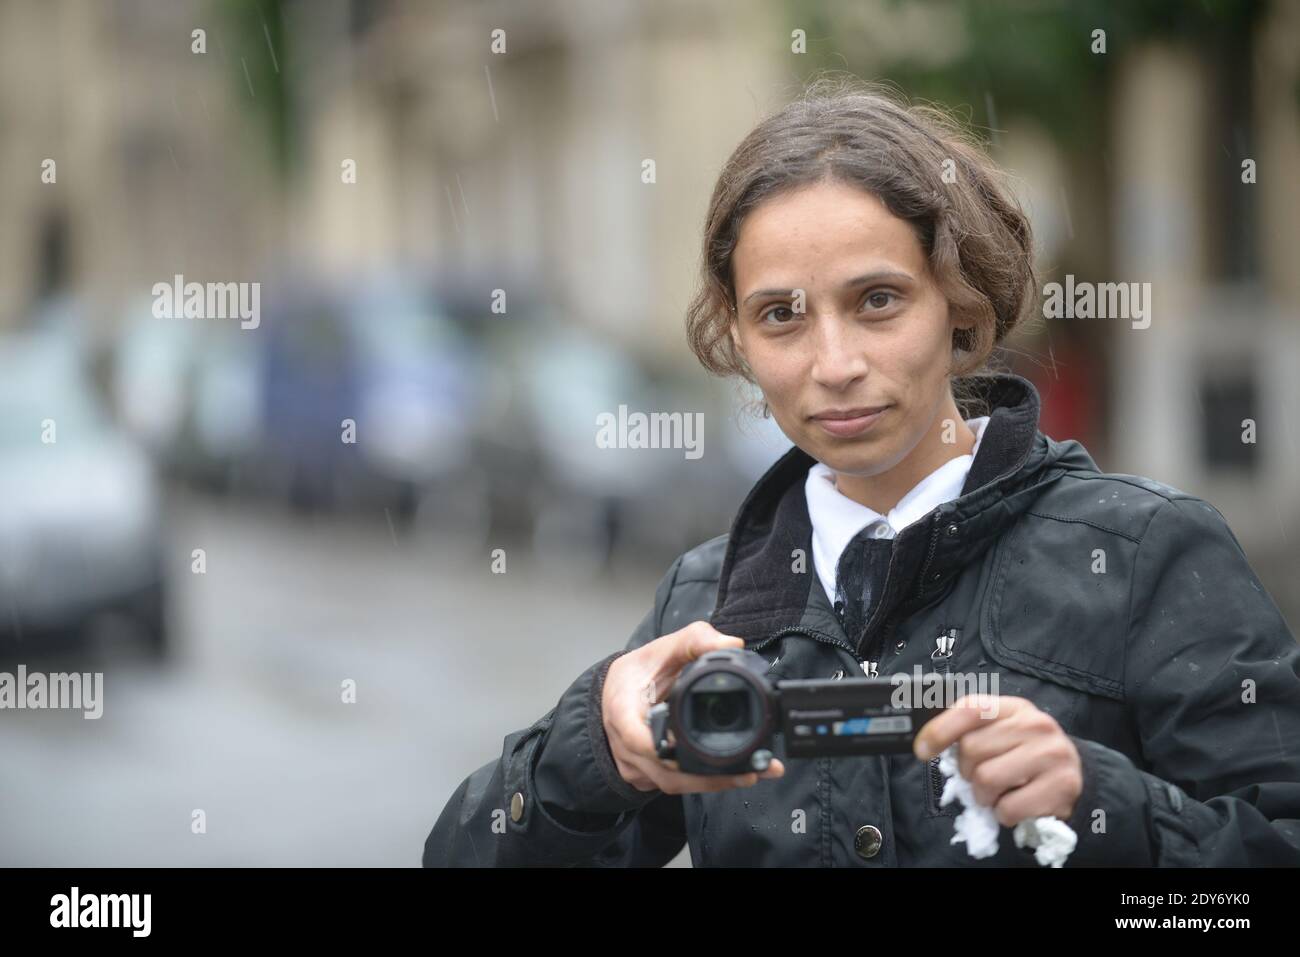 Syrian (and Kurdish) director Wiam Simav Bedirxan ('Silver Water' or 'Eau Argentee') poses in Paris, France, on June 4, 2014. Photo by Ammar Abd Rabbo/ABACAPRESS.COM Stock Photo